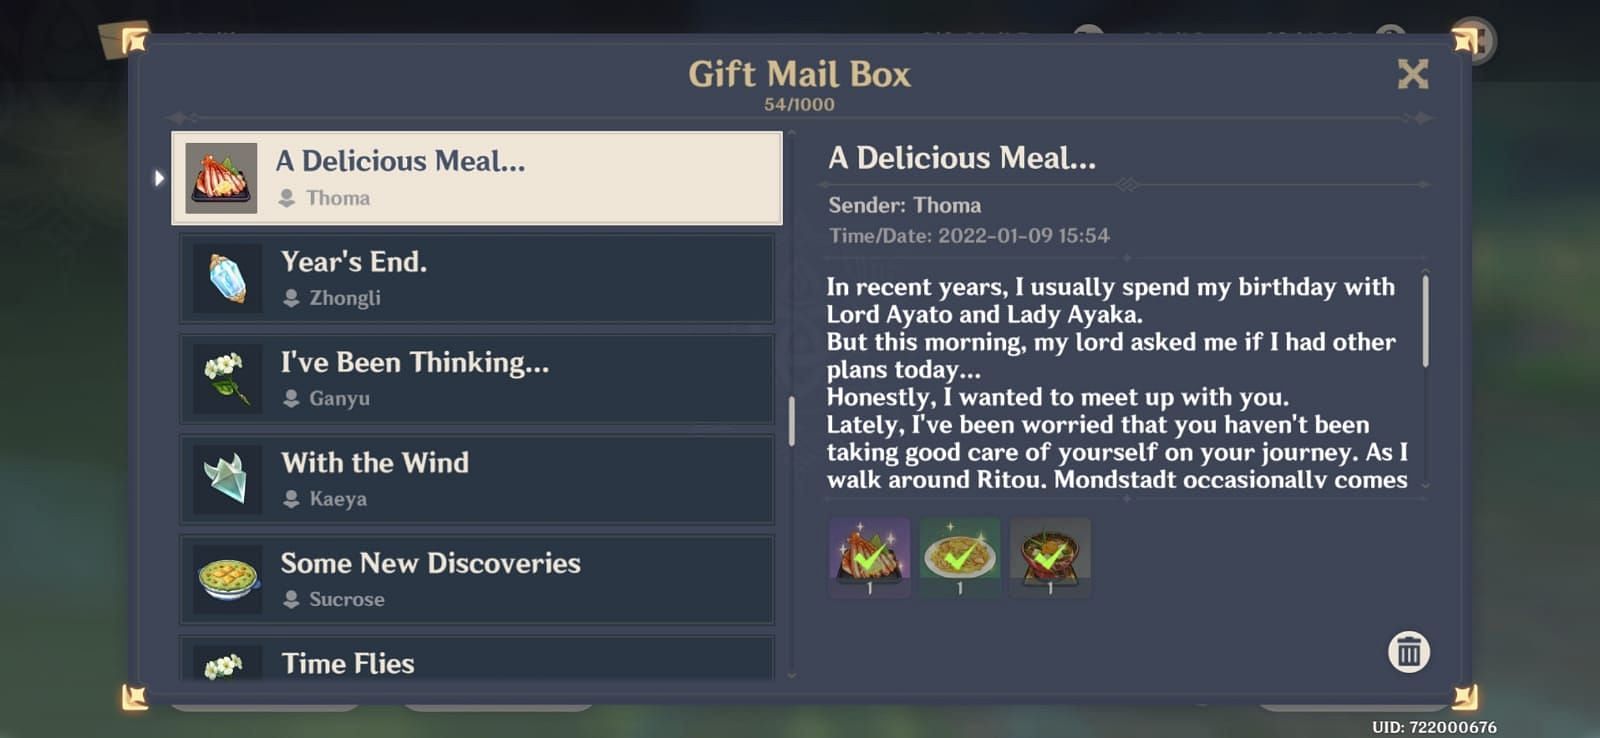 Mail sent by Thoma in 2022 included three food items (Image via Genshin Impact)